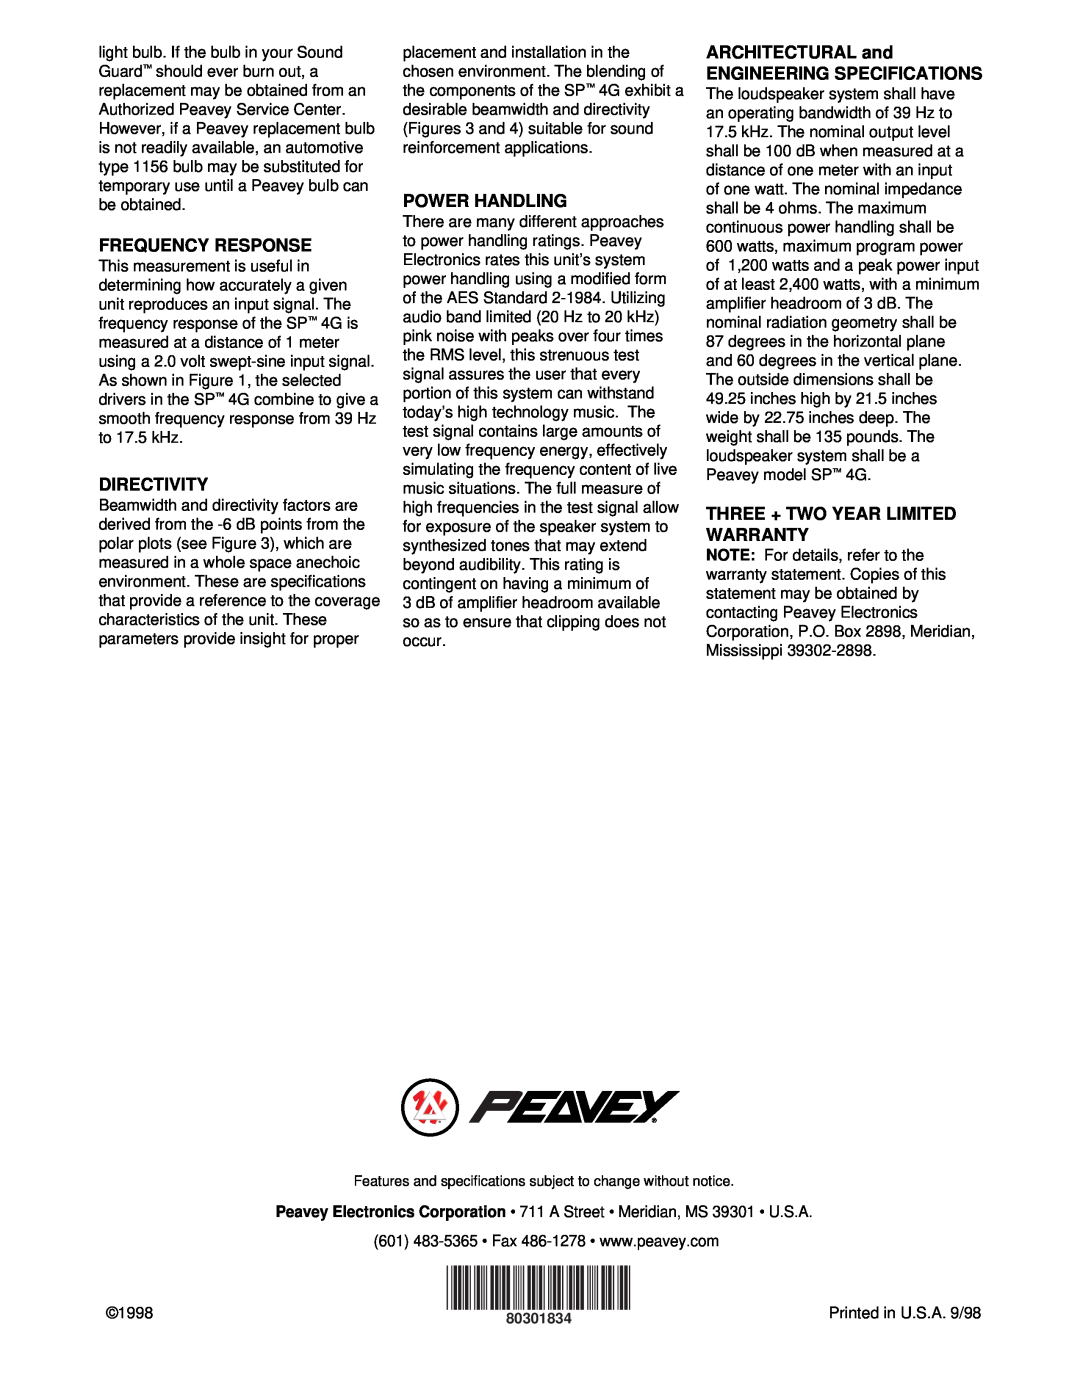 Peavey 4G specifications Frequency Response, Directivity, Power Handling, ARCHITECTURAL and ENGINEERING SPECIFICATIONS 